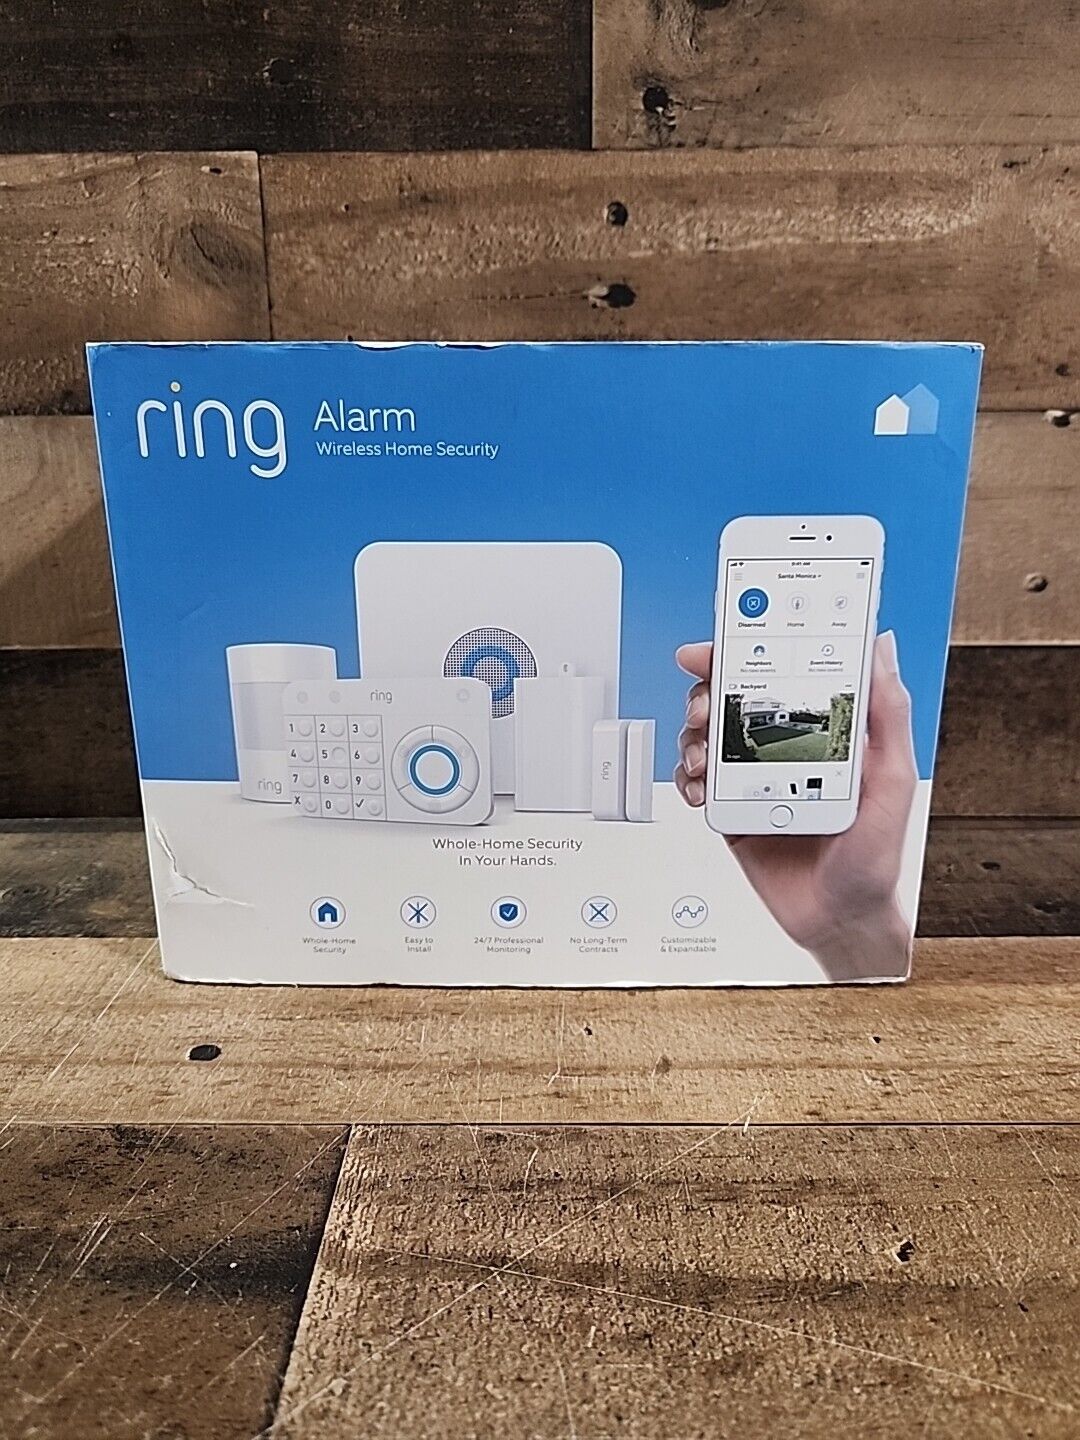 Brand New Ring Alarm Wireless Whole Home Security System Works With Alexa. L-1